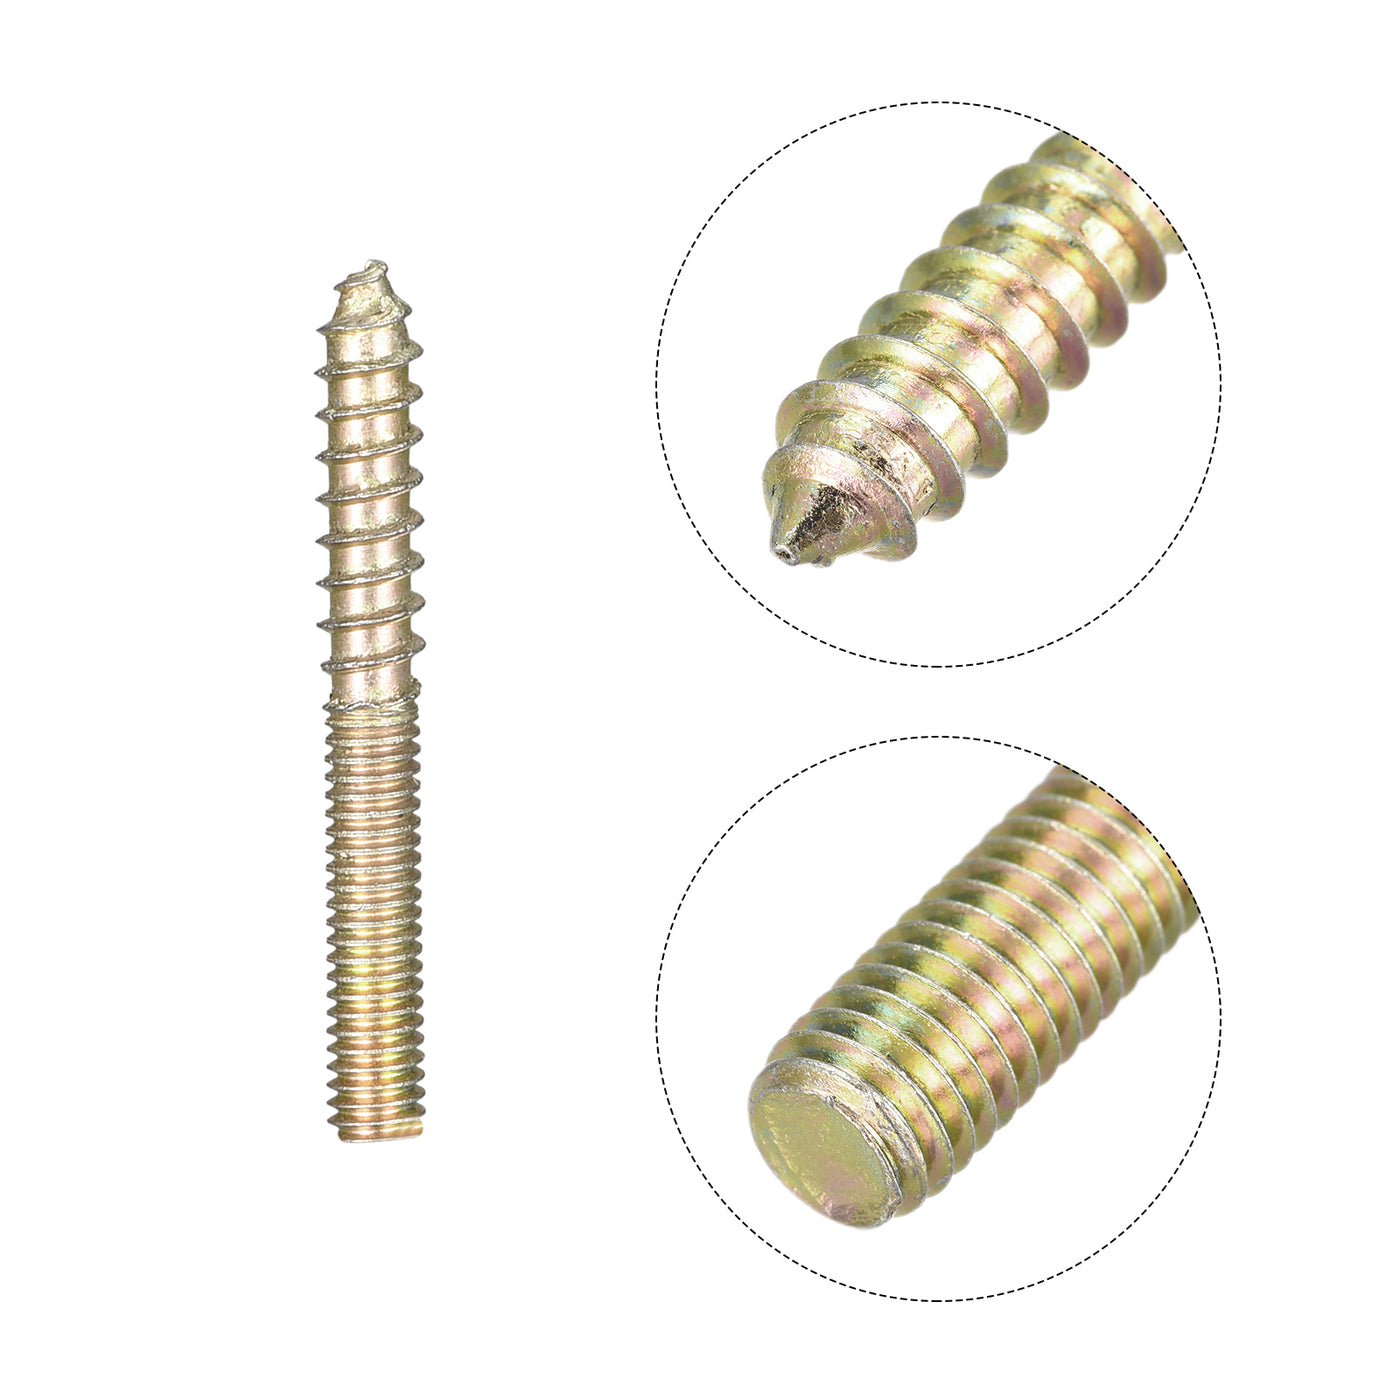 Uxcell Uxcell M6x35mm Hanger Bolts, 24pcs Double Ended Thread Dowel Screws for Wood Furniture